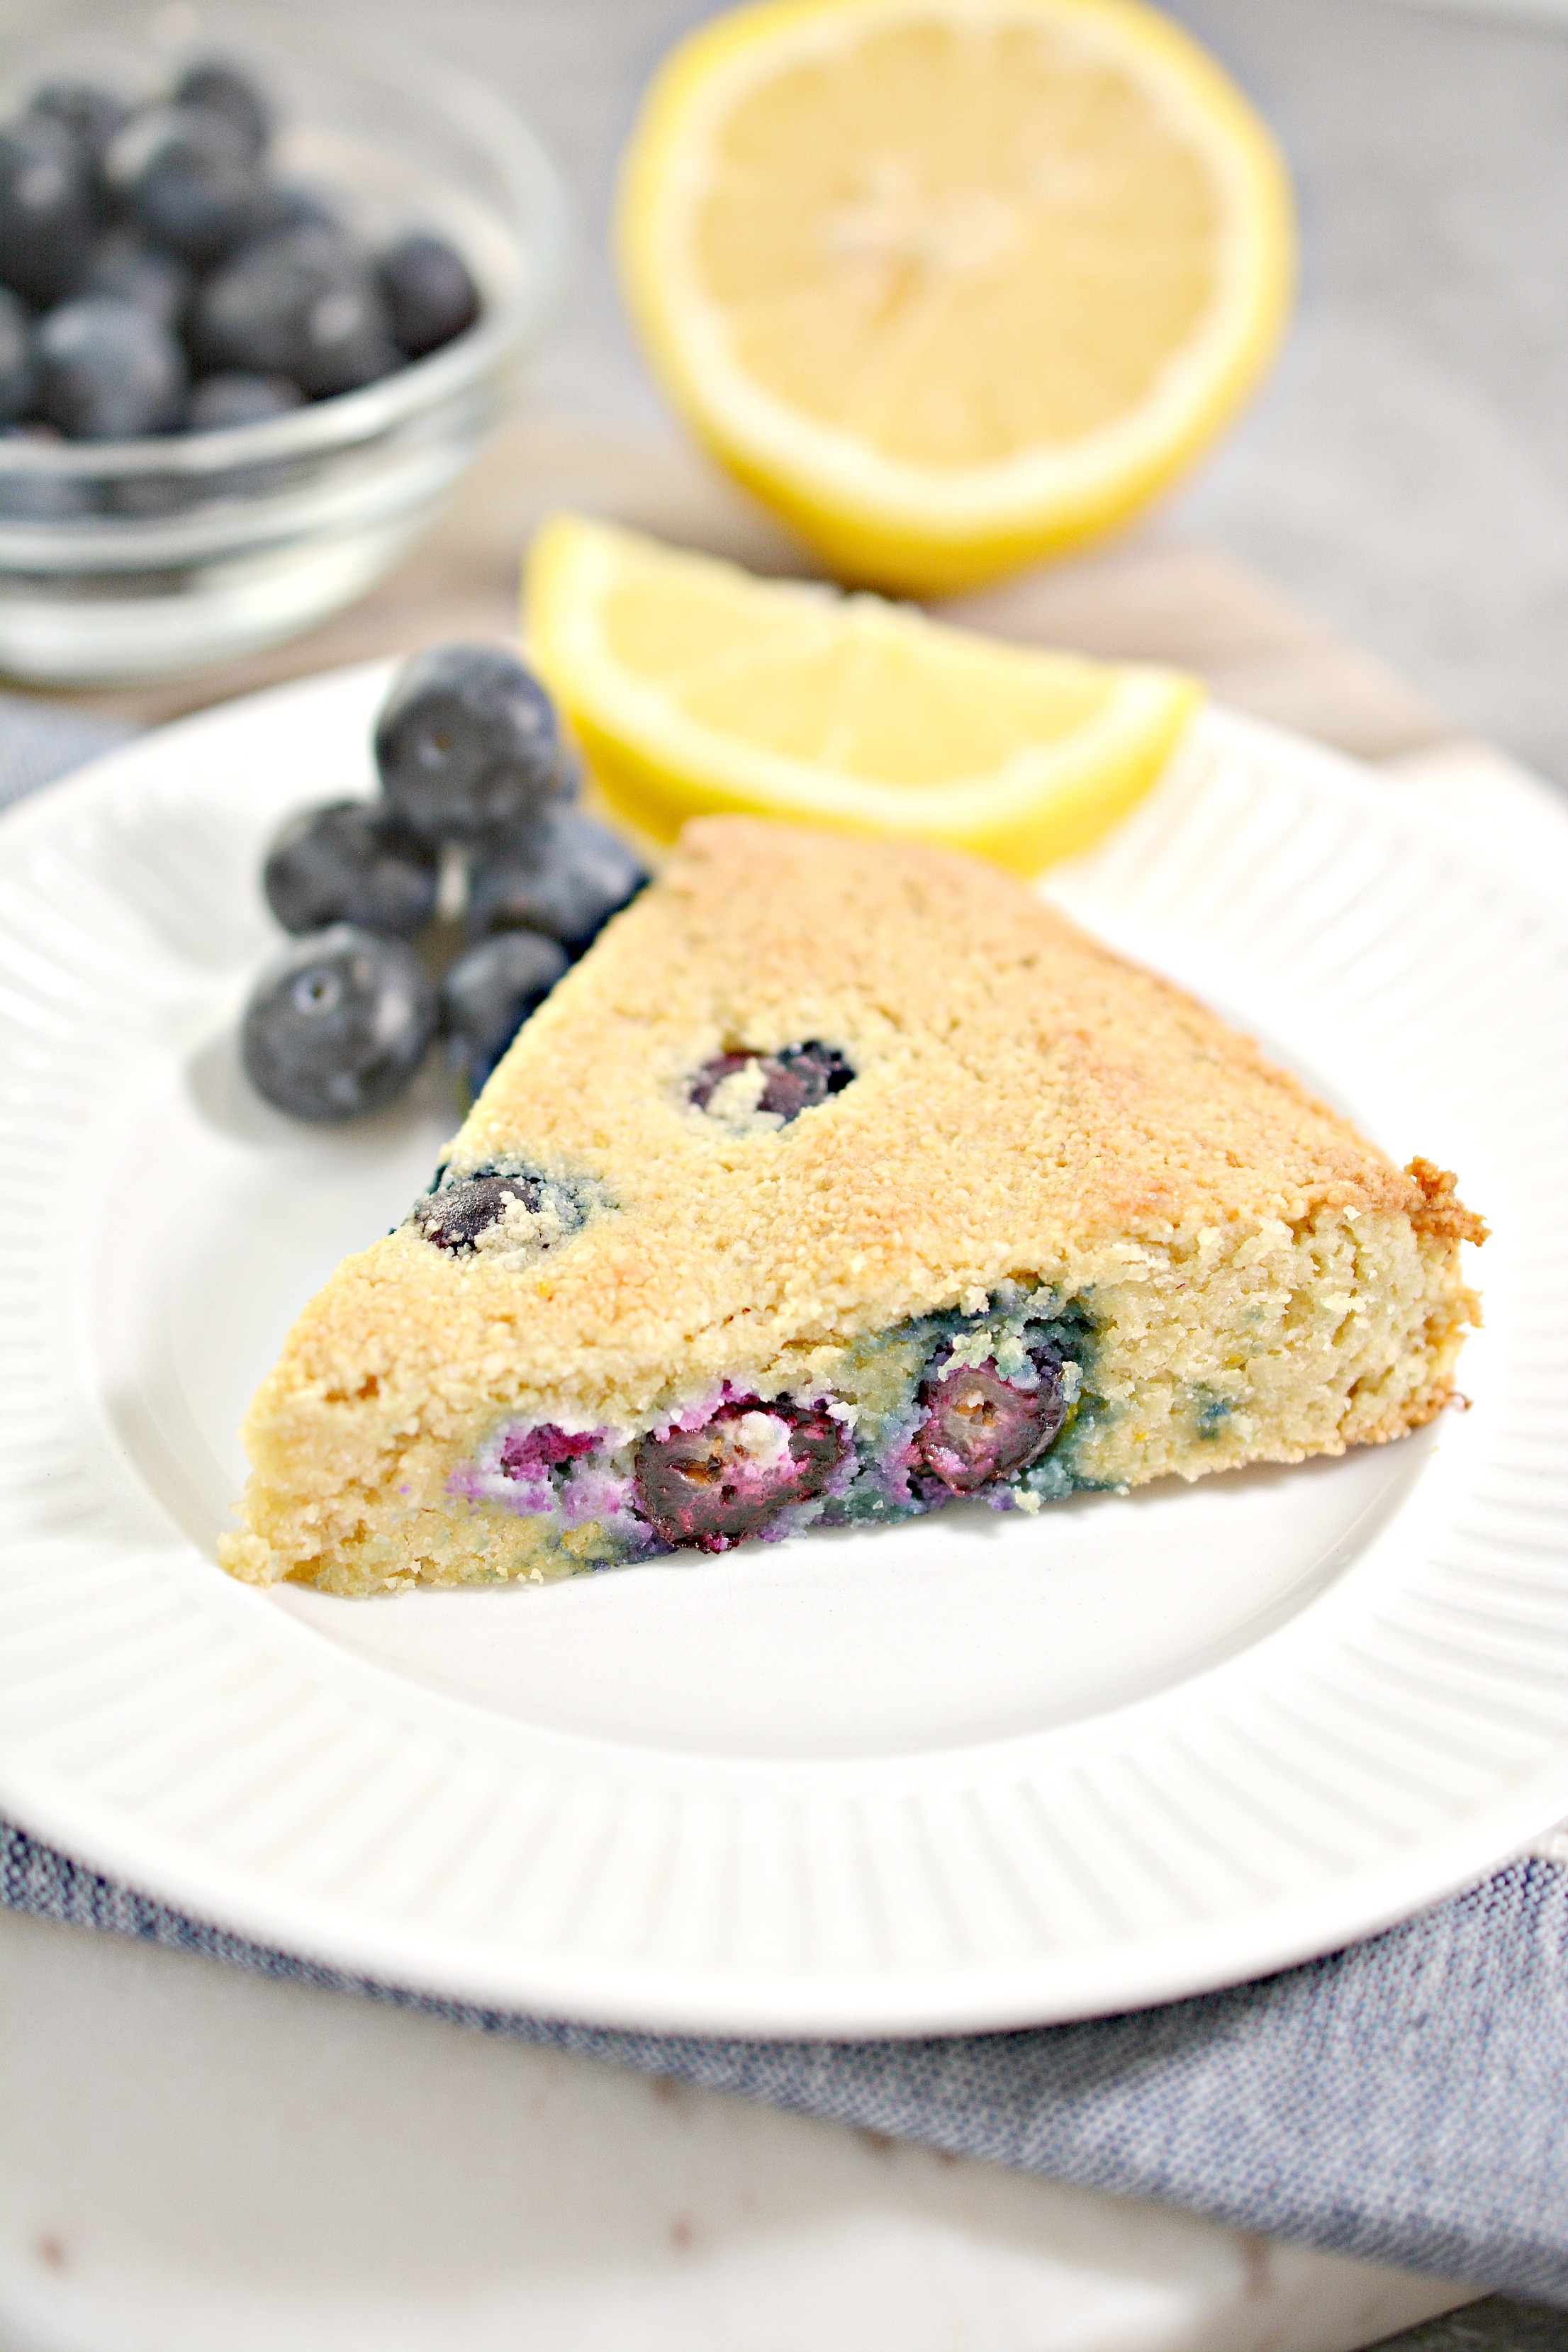 Love scones but following Keto? I have a keto scones recipe for you! You will love this keto lemon blueberry scones recipe. With this sweet tasting treat, you will love that you can enjoy this keto scones recipe and it is only 5 net carbs per serving. 